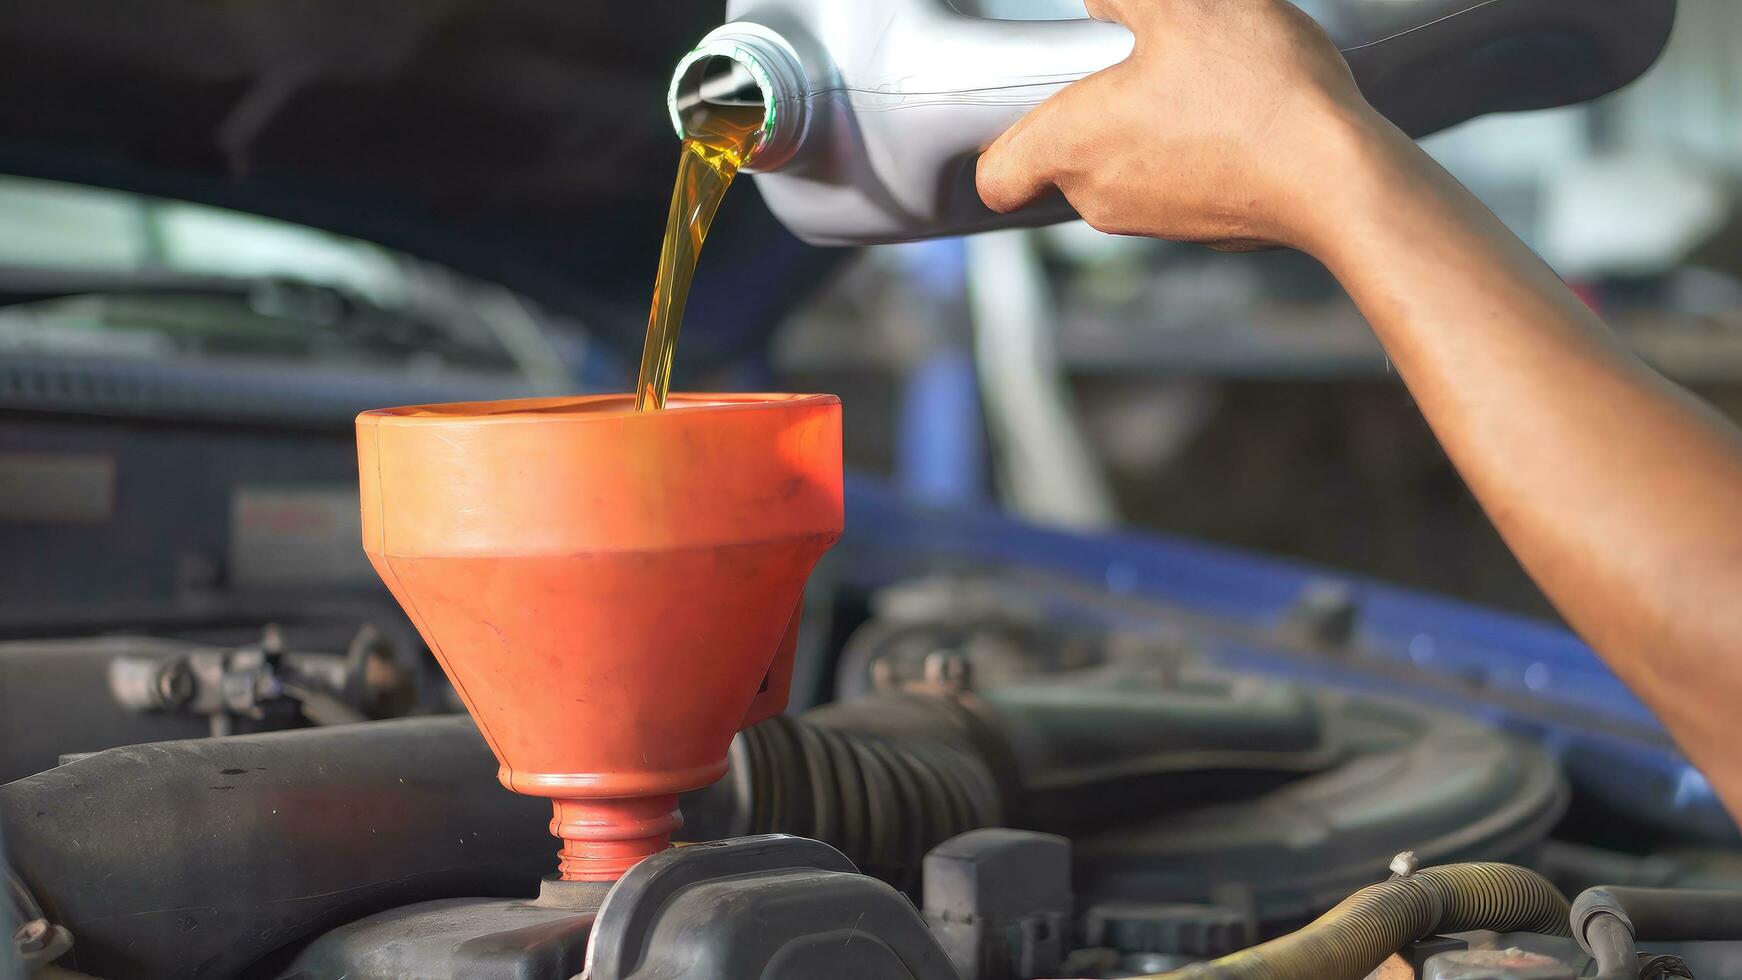 The mechanic is pouring new oil into the engine. Car technical fluid replacement. photo